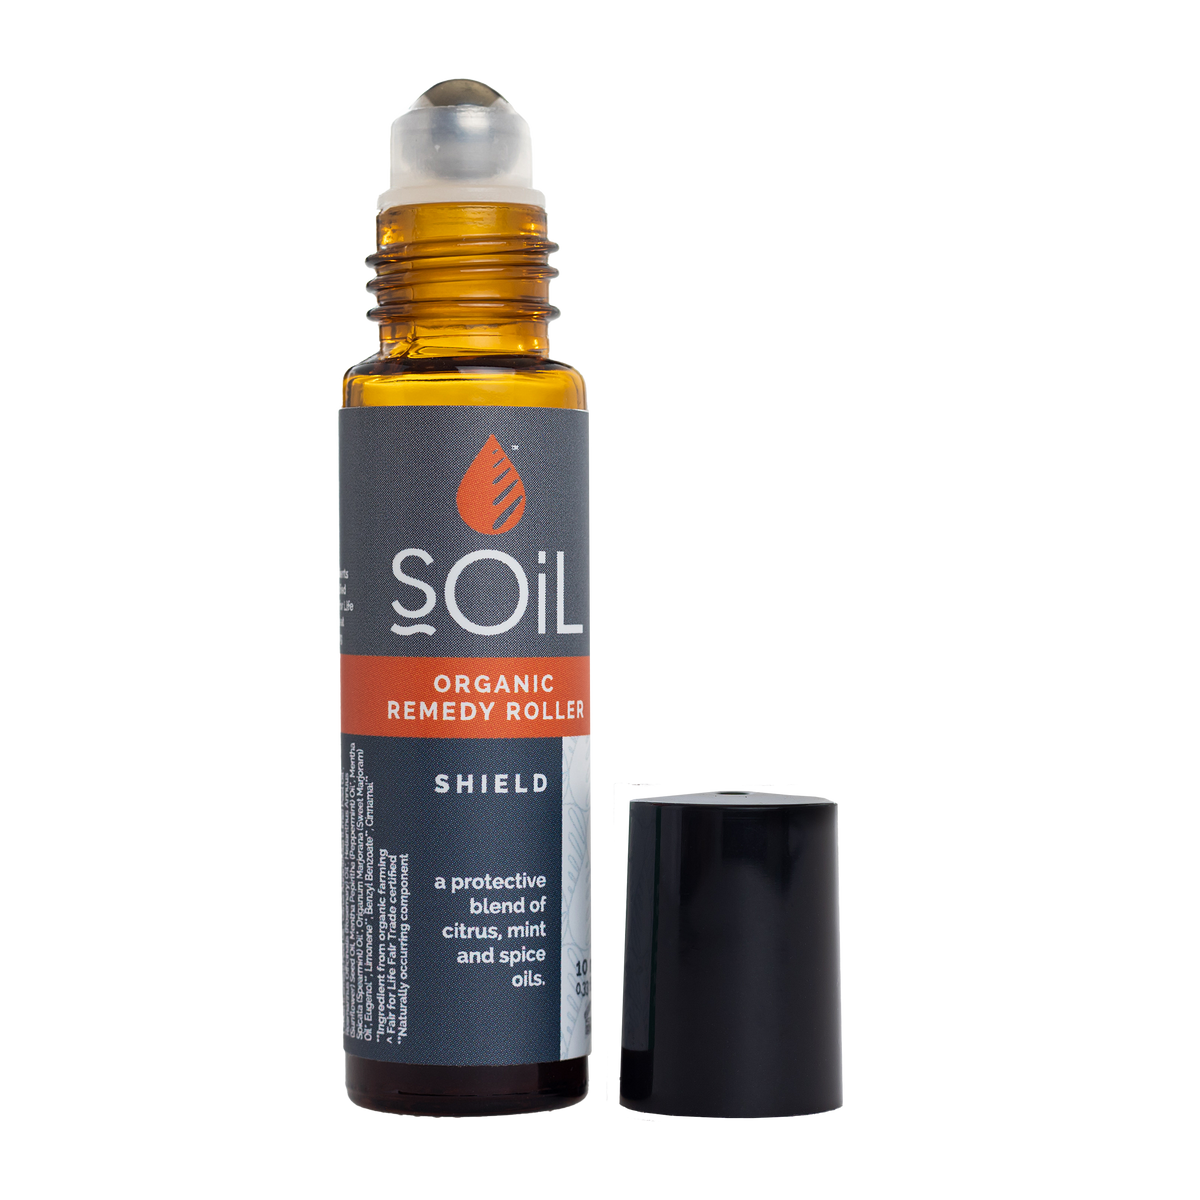 Shield - Organic Remedy Roller by SOiL Organic Aromatherapy and Skincare